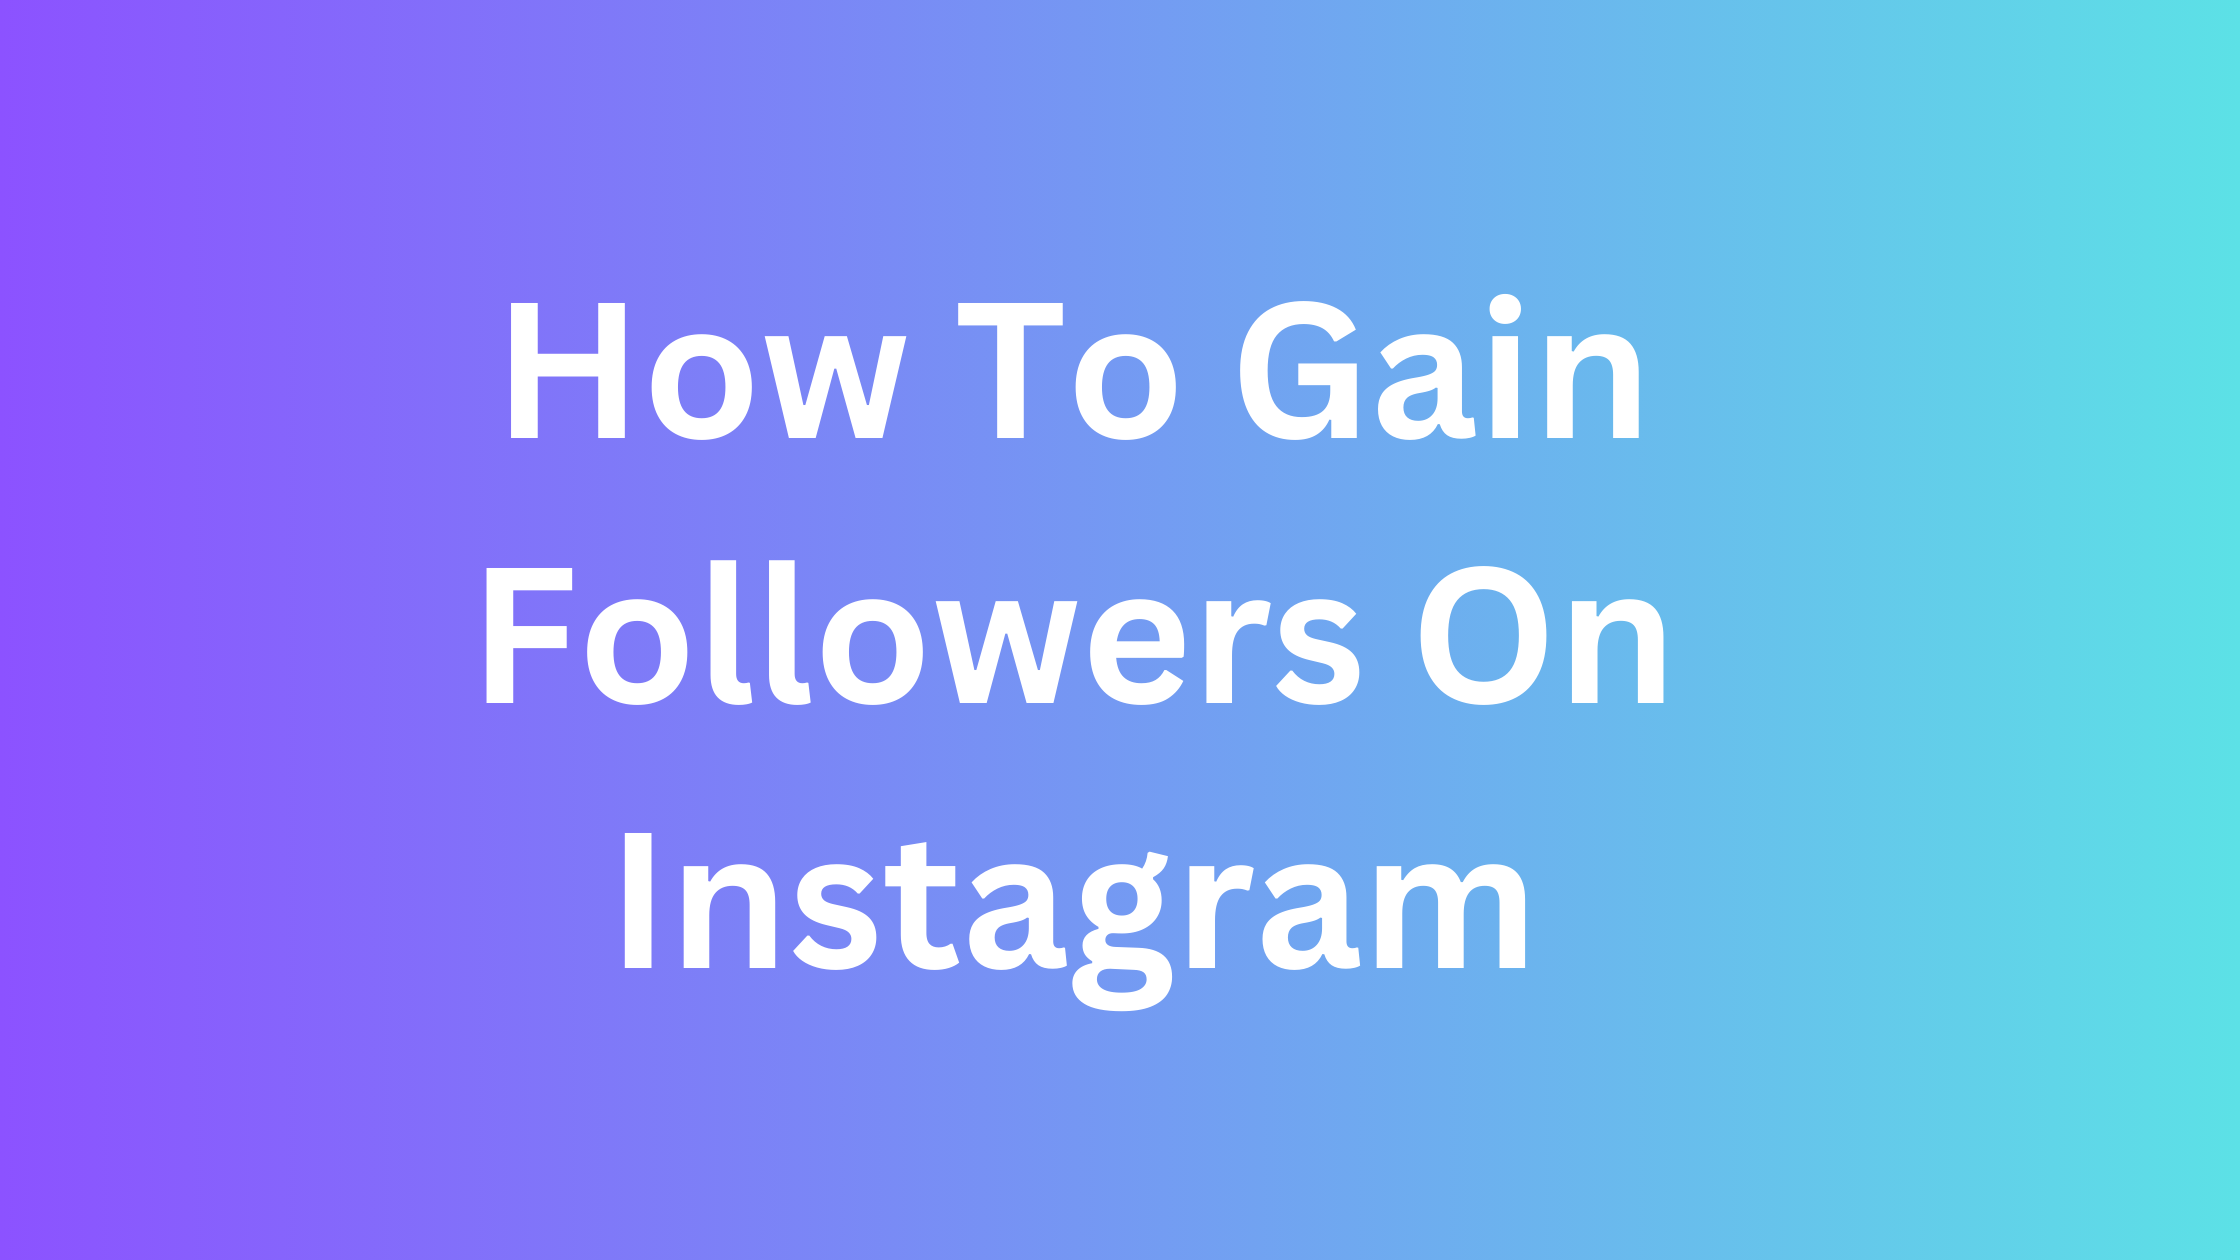 How To Gain Followers On Instagram